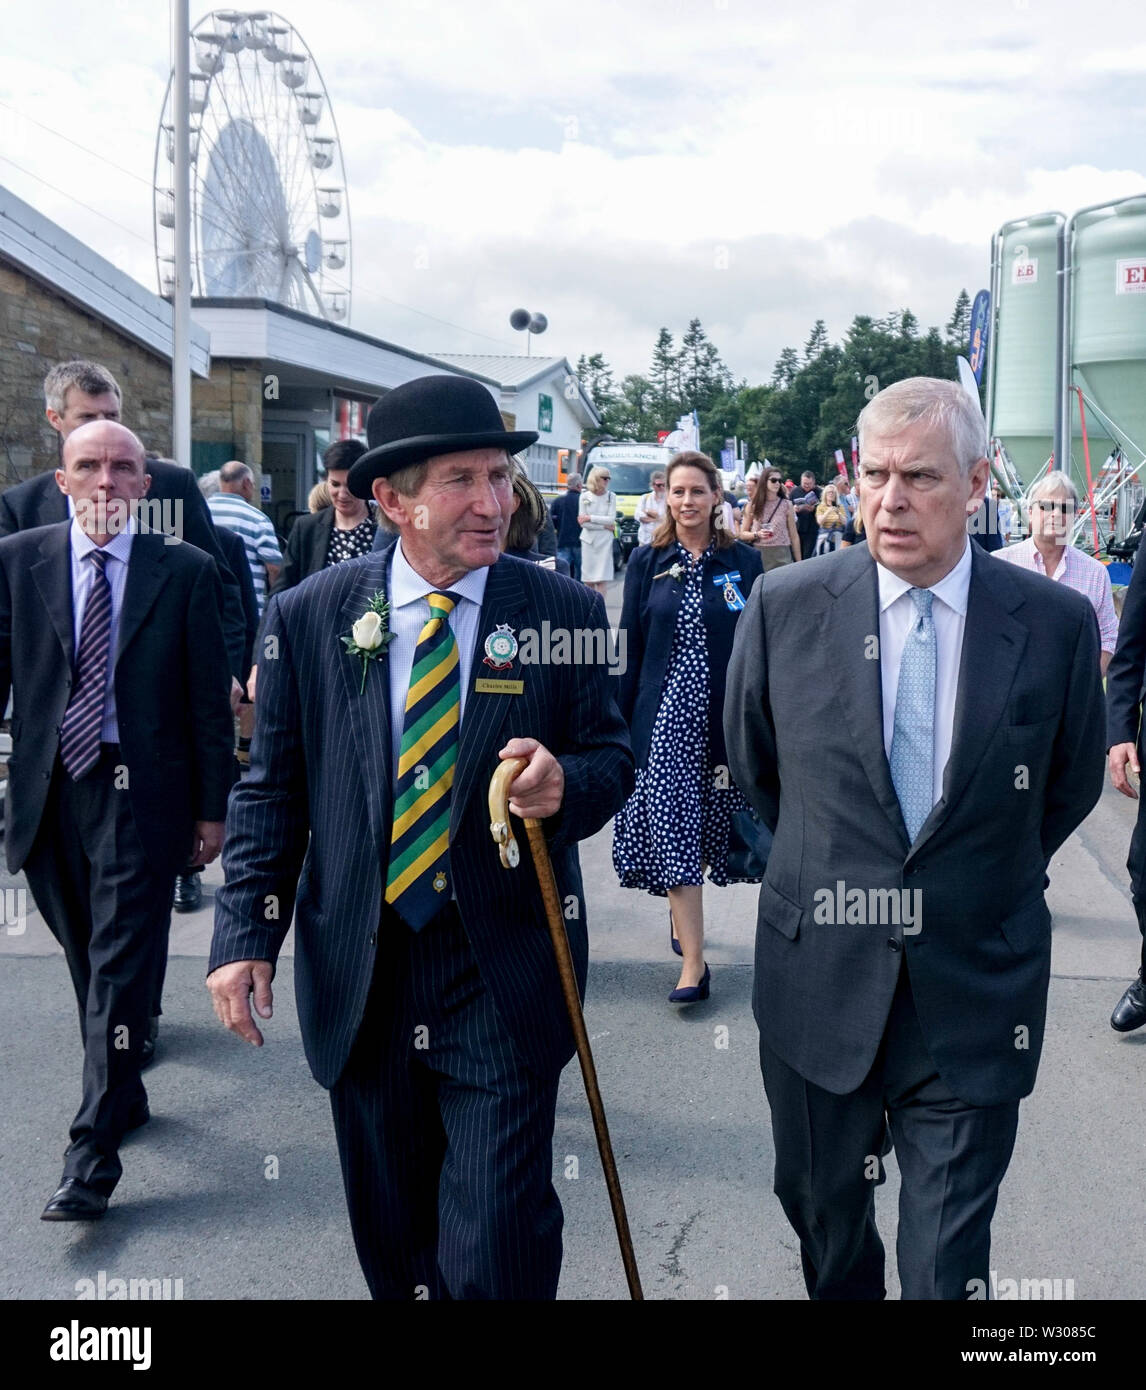 Prince Andrew, Duke of York visits the showground on the final day of the 161st Great Yorkshire Show.Great Yorkshire Show is held annually on 9 - 11 July and celebrates the farming and agricultural community. Stock Photo